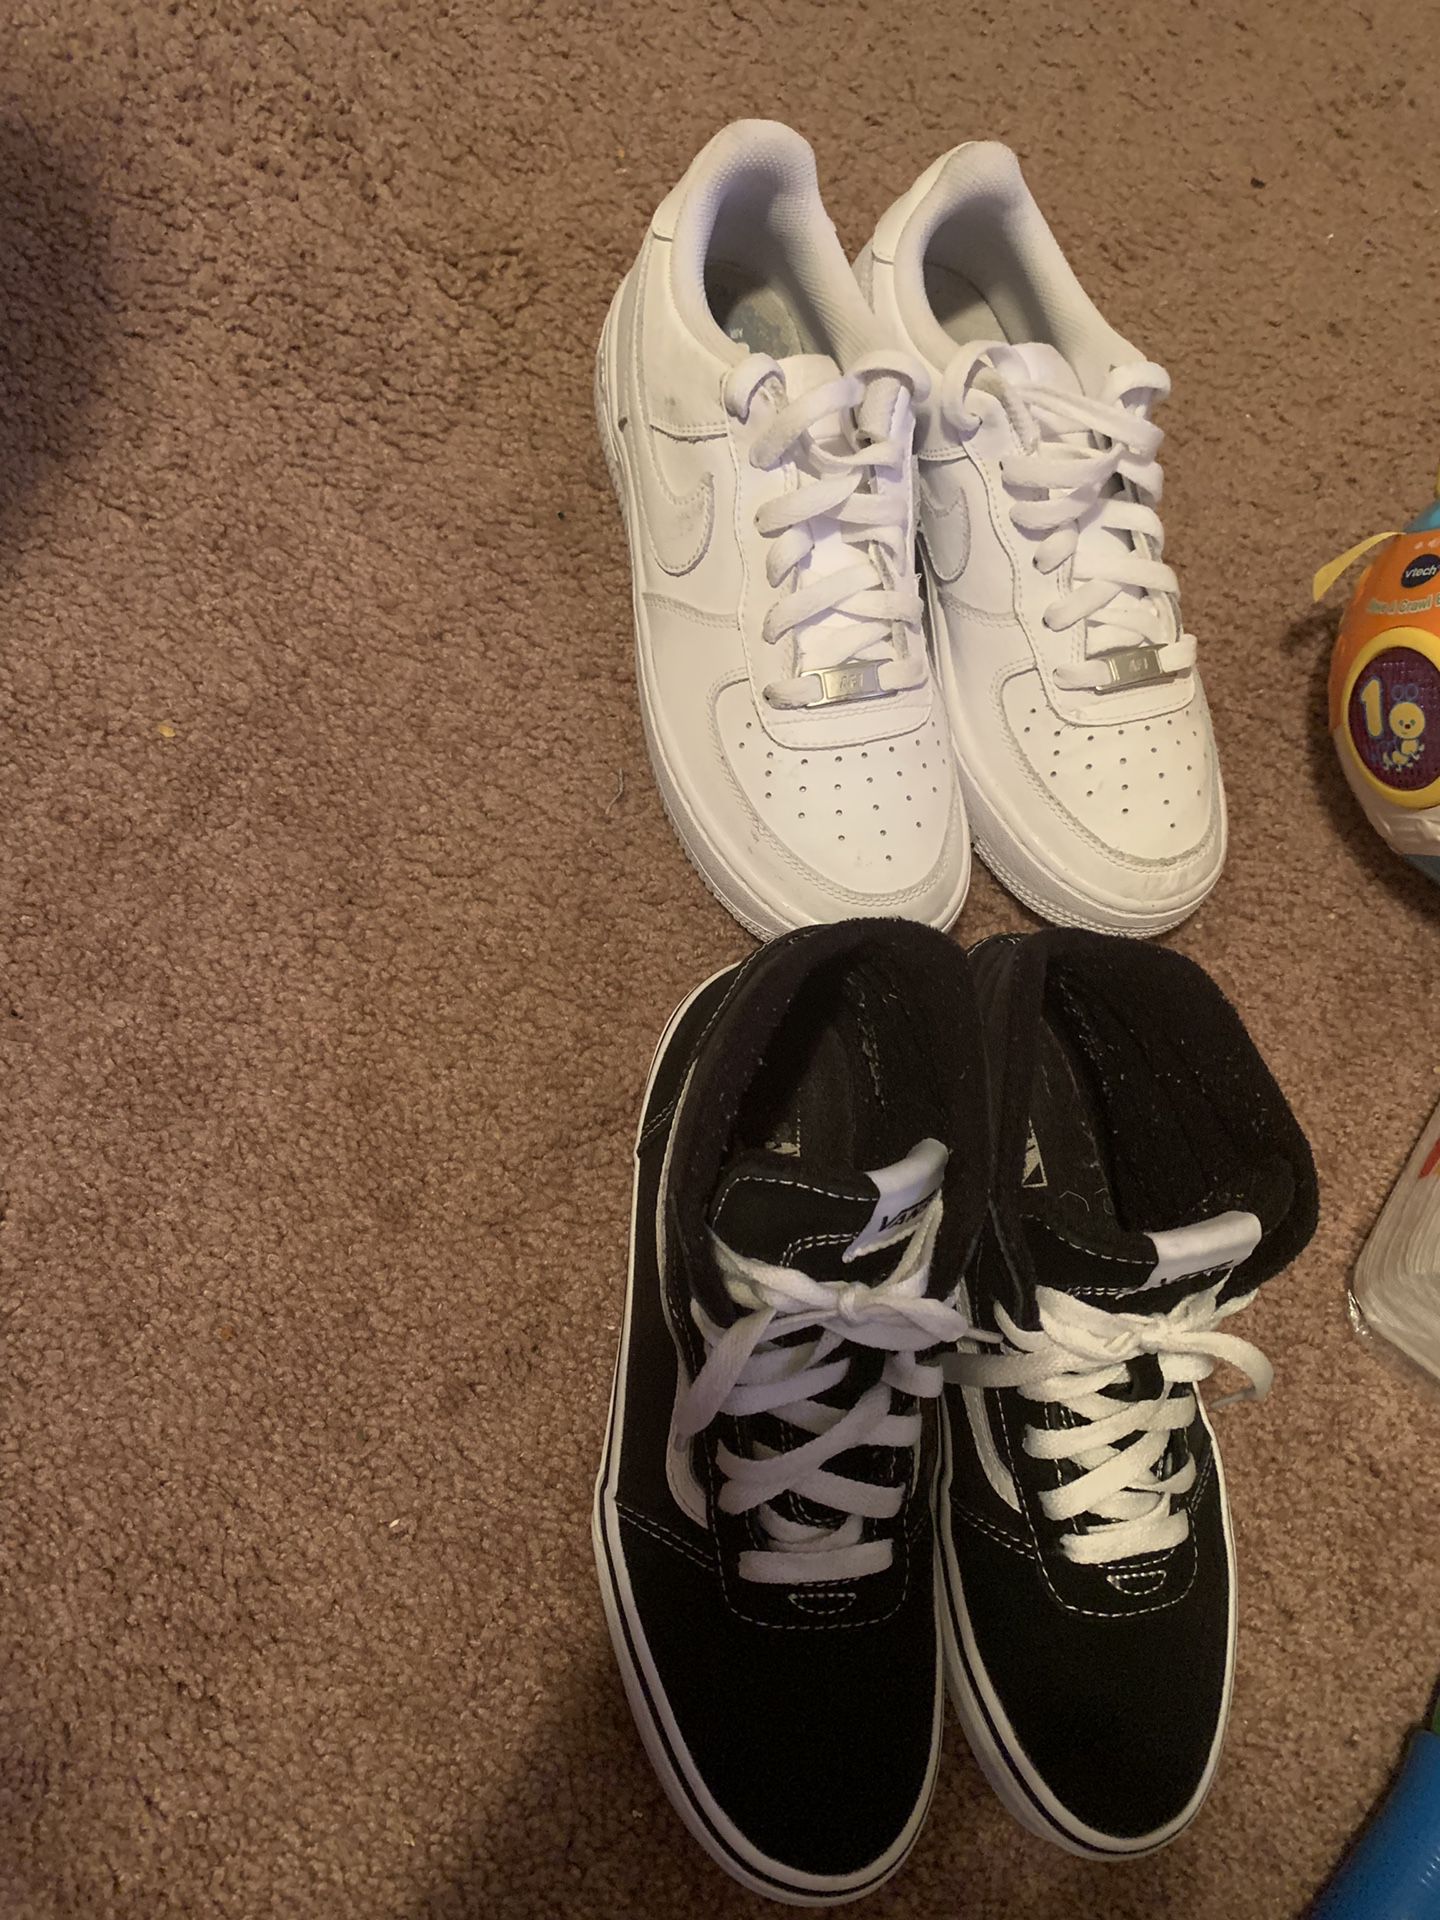 Vans size 5.0 / Air Force 1s size 5Y $35!each both for $60